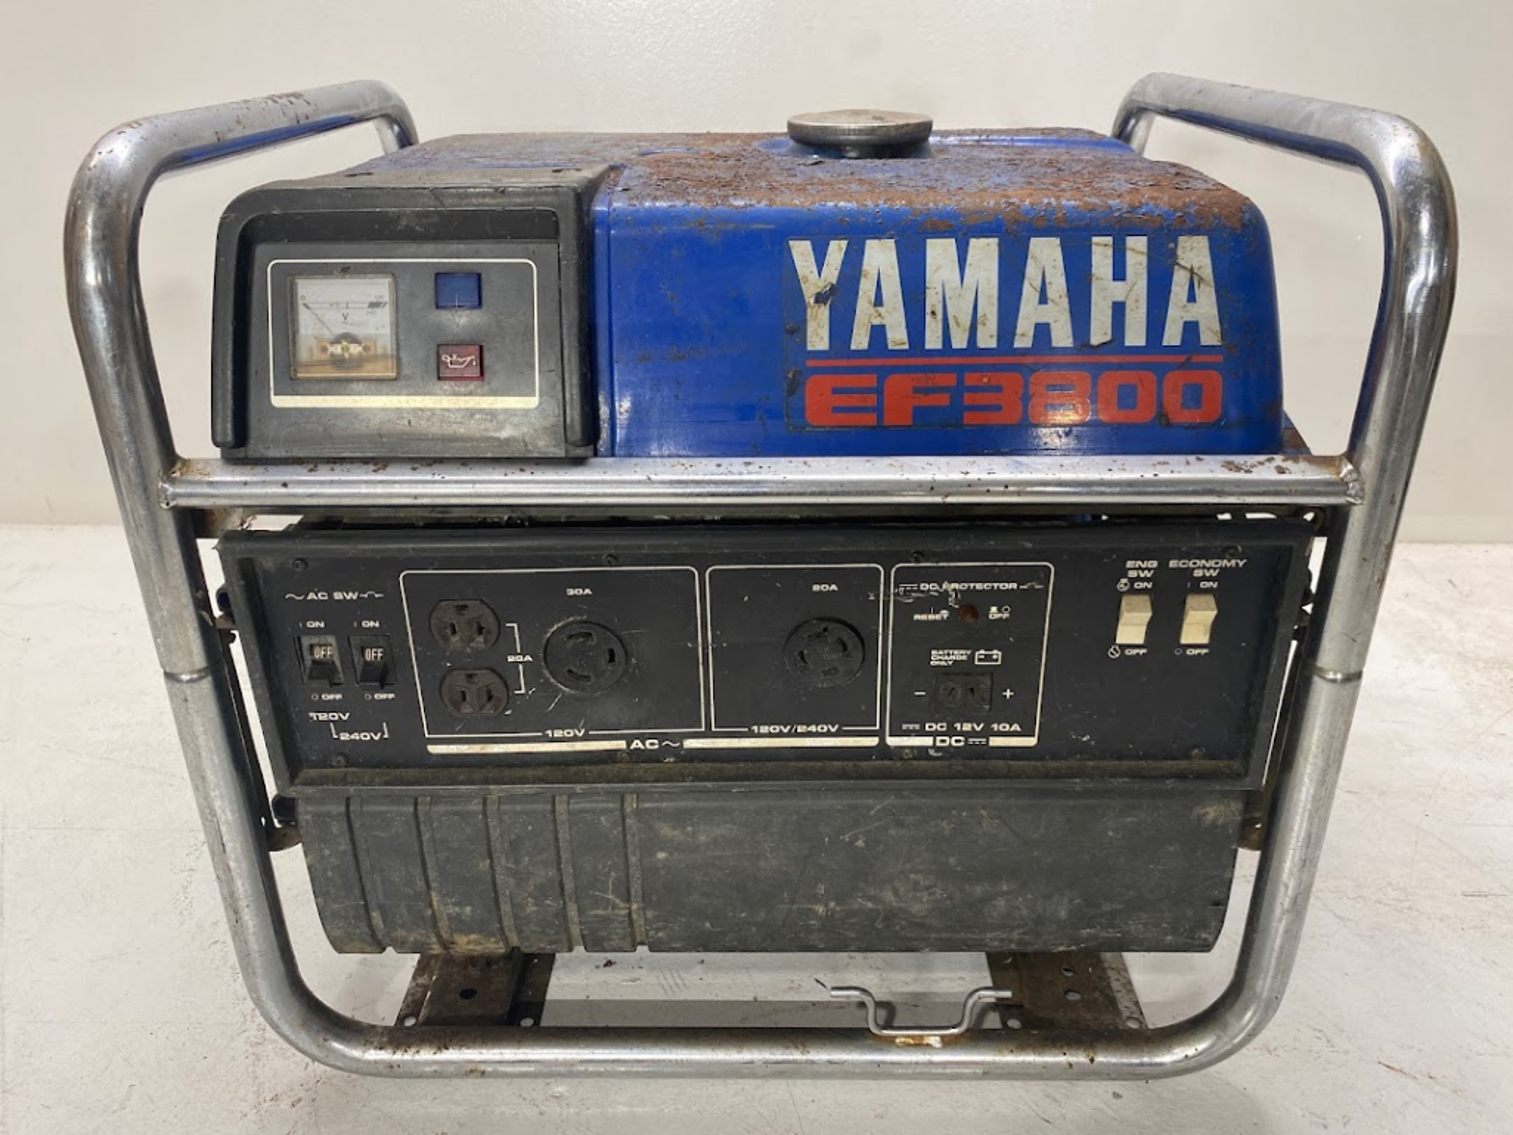 Personal Property Liquidation Auction: Small Engines, Tools and Vintage Items